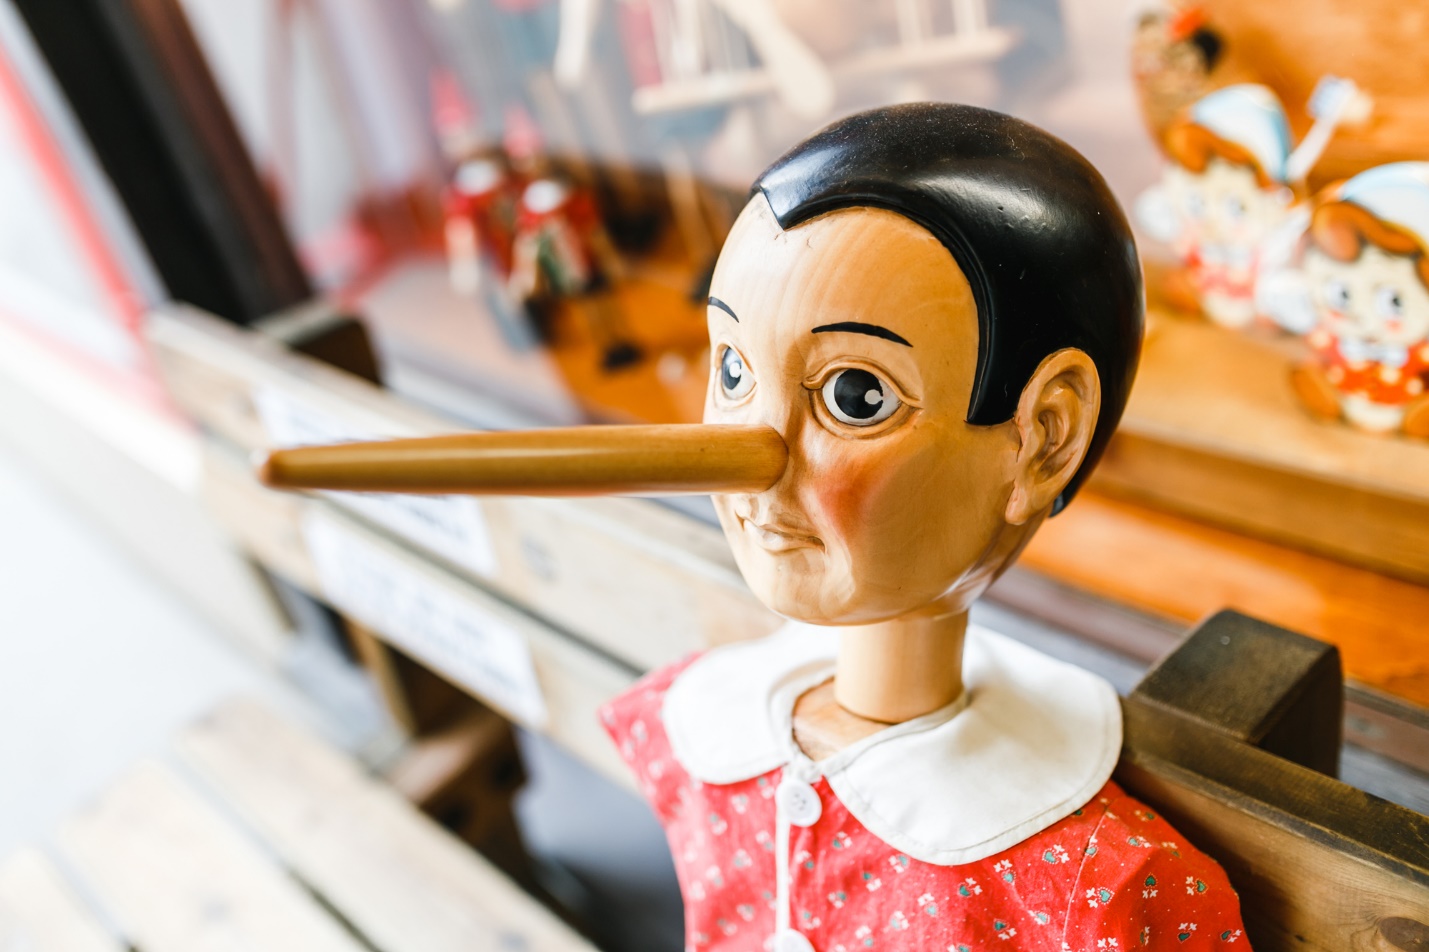 A wooden pinocchio doll with long nose

Description automatically generated